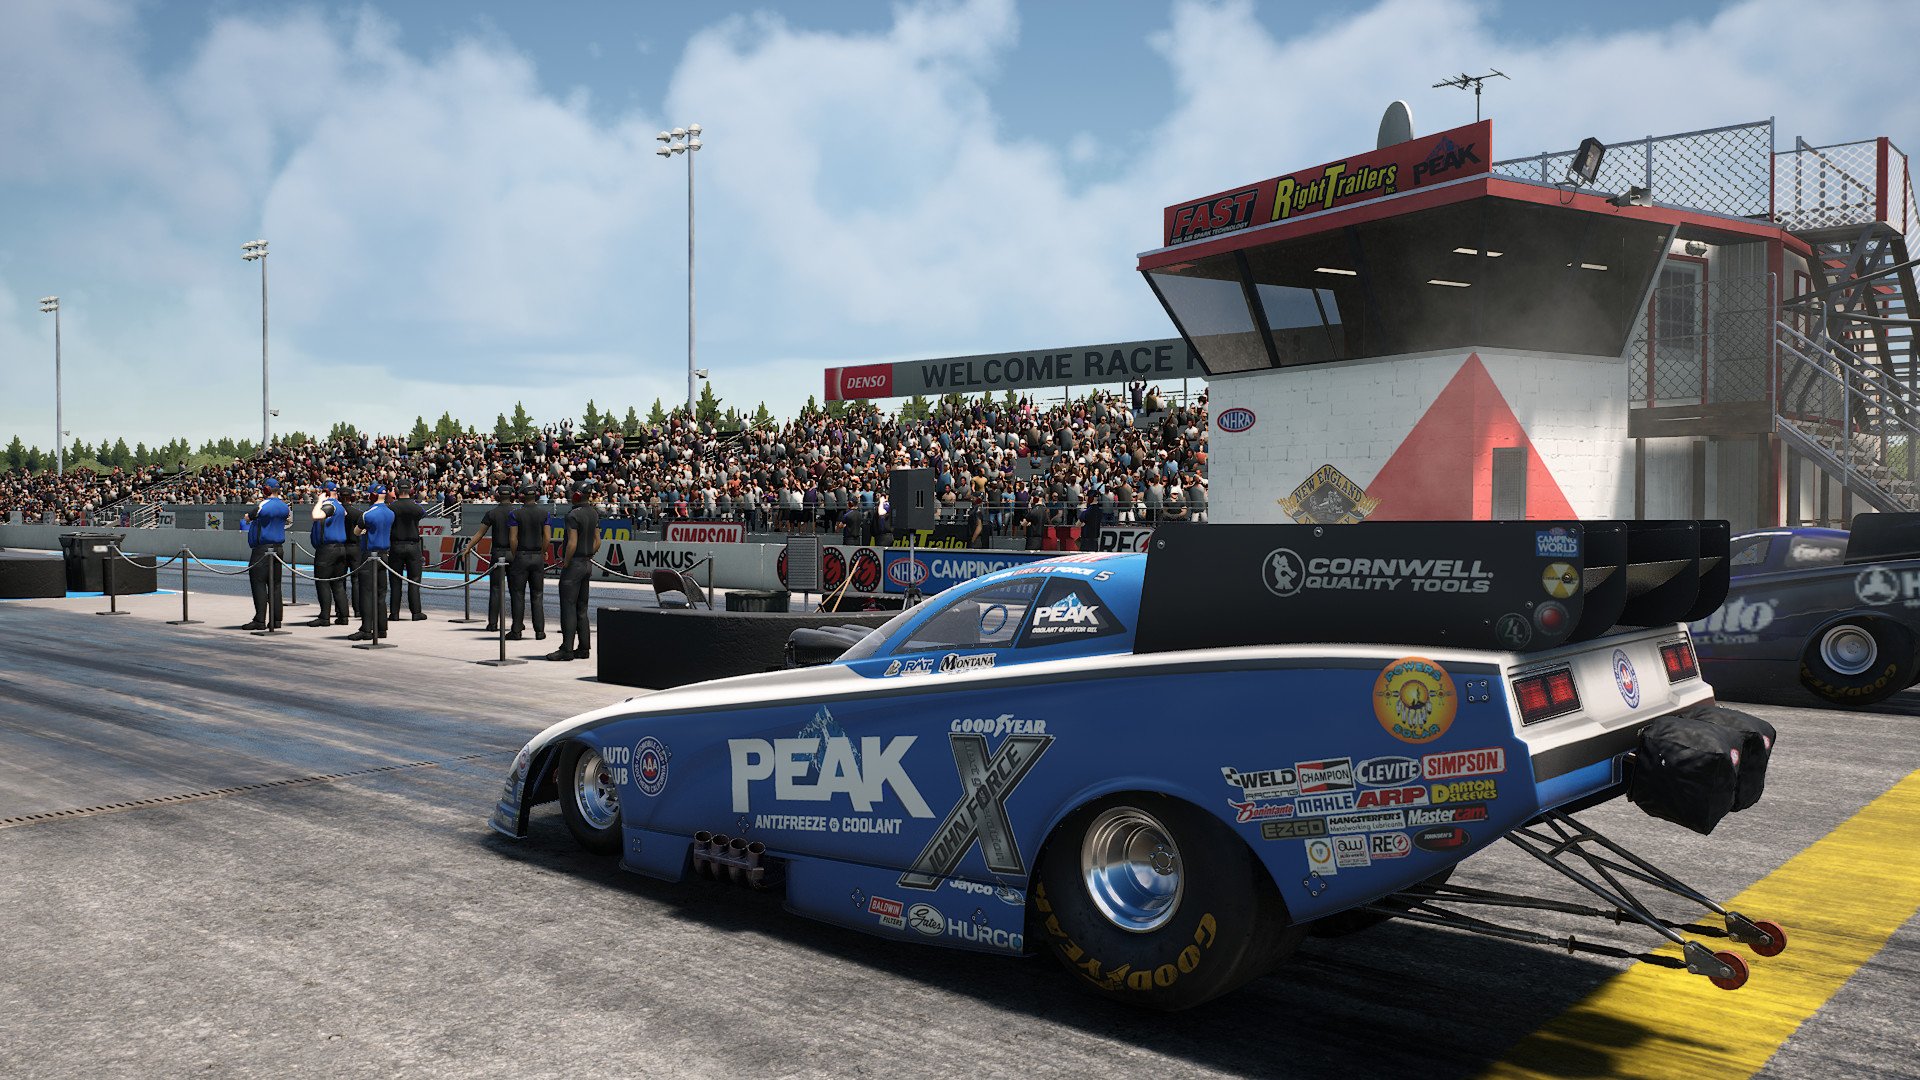 NHRA Championship Drag Racing Speed for All 2